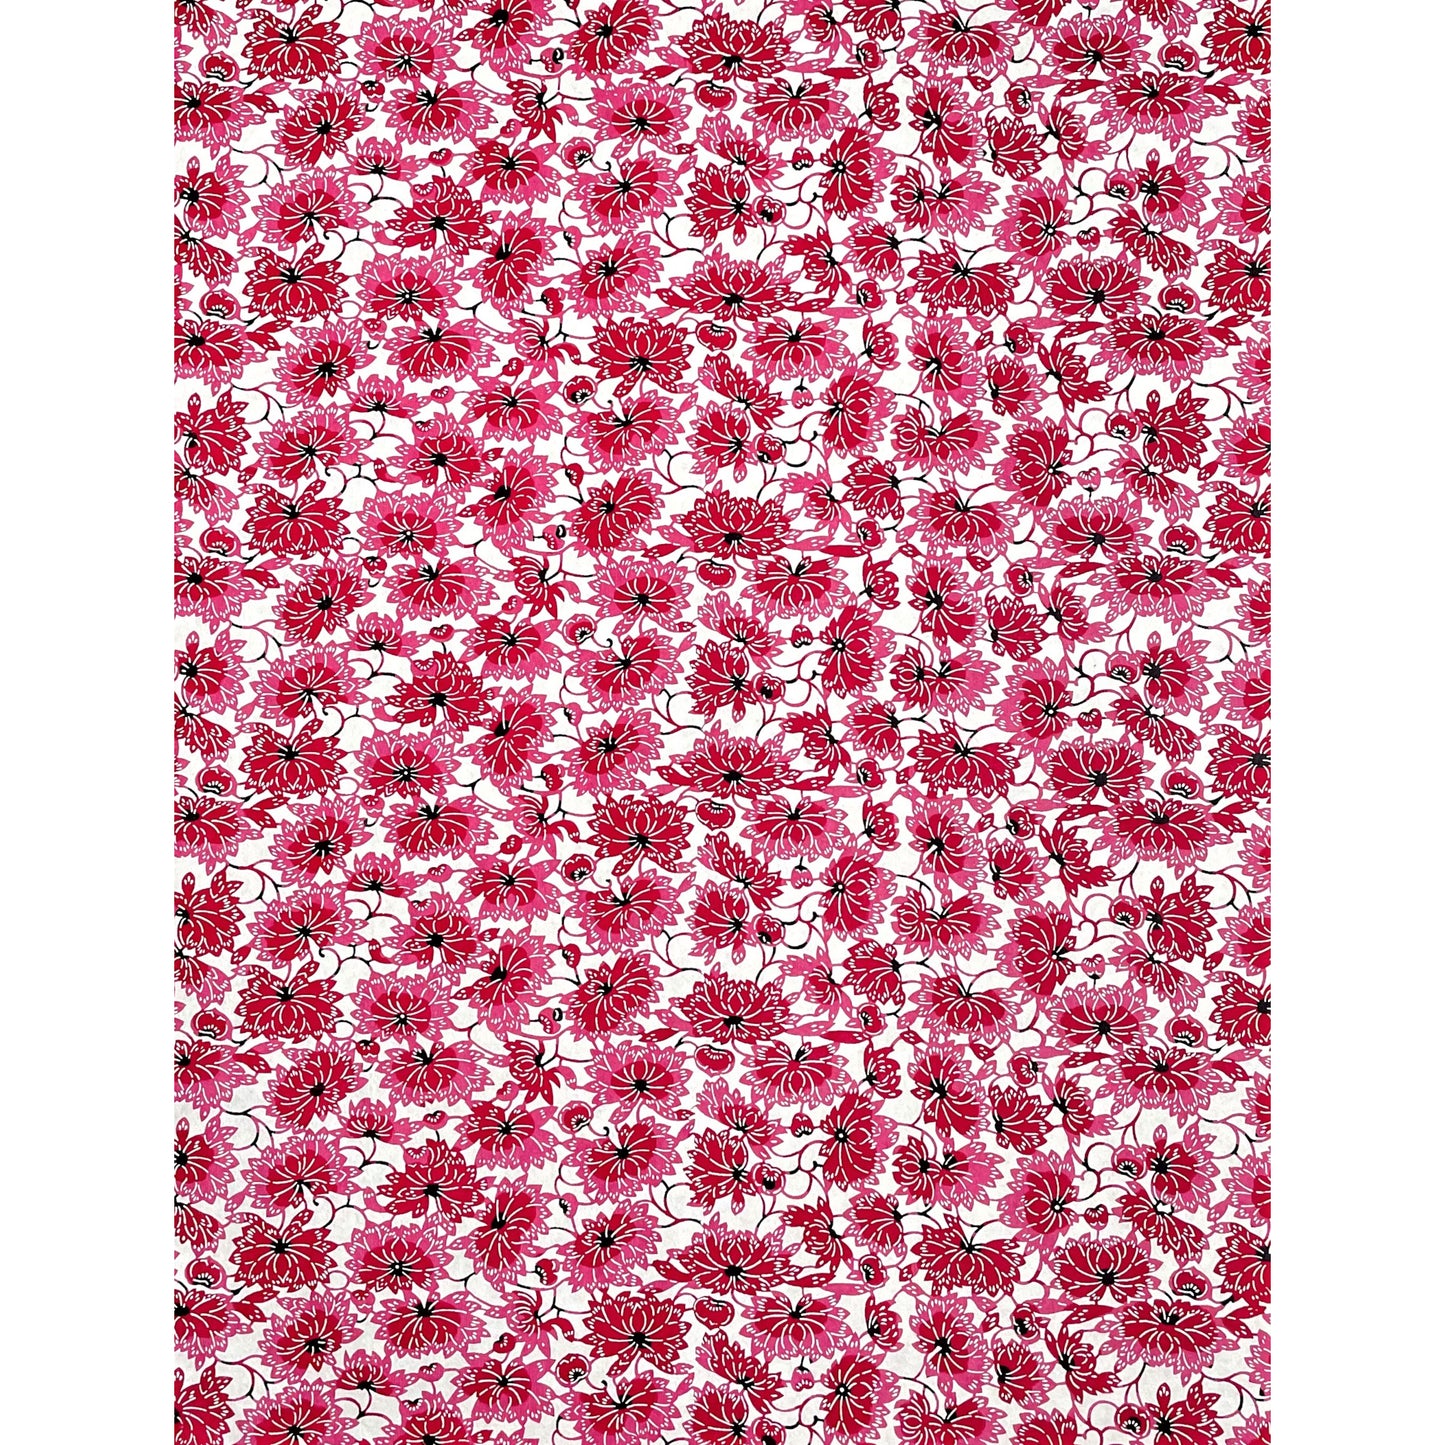 japanese stencil-dyed handmade paper with two-tone pink chrysanthemum repeat pattern, full size sheet